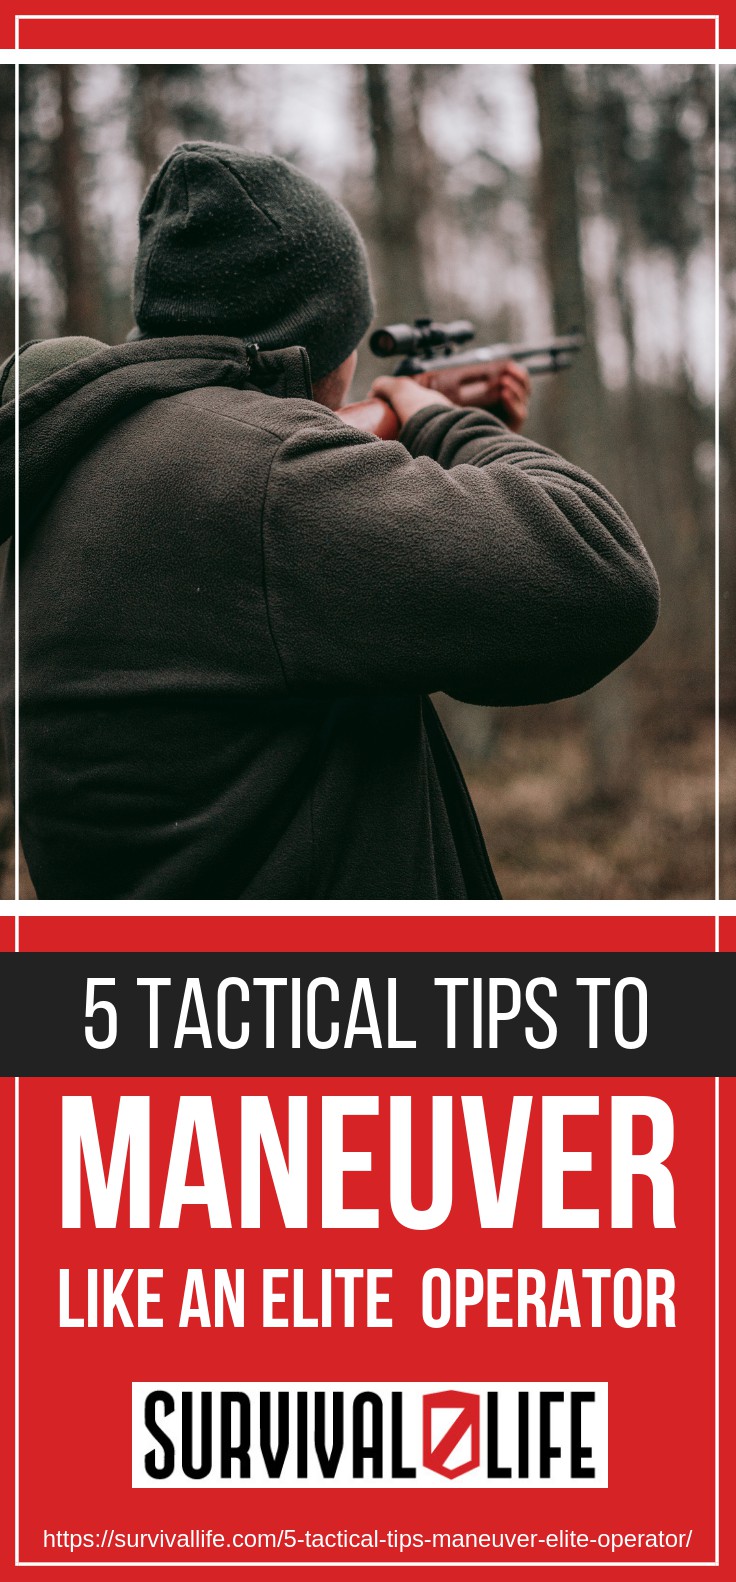 5 Tactical Tips To Maneuver Like An Elite Operator https://survivallife.com/5-tactical-tips-maneuver-elite-operator/